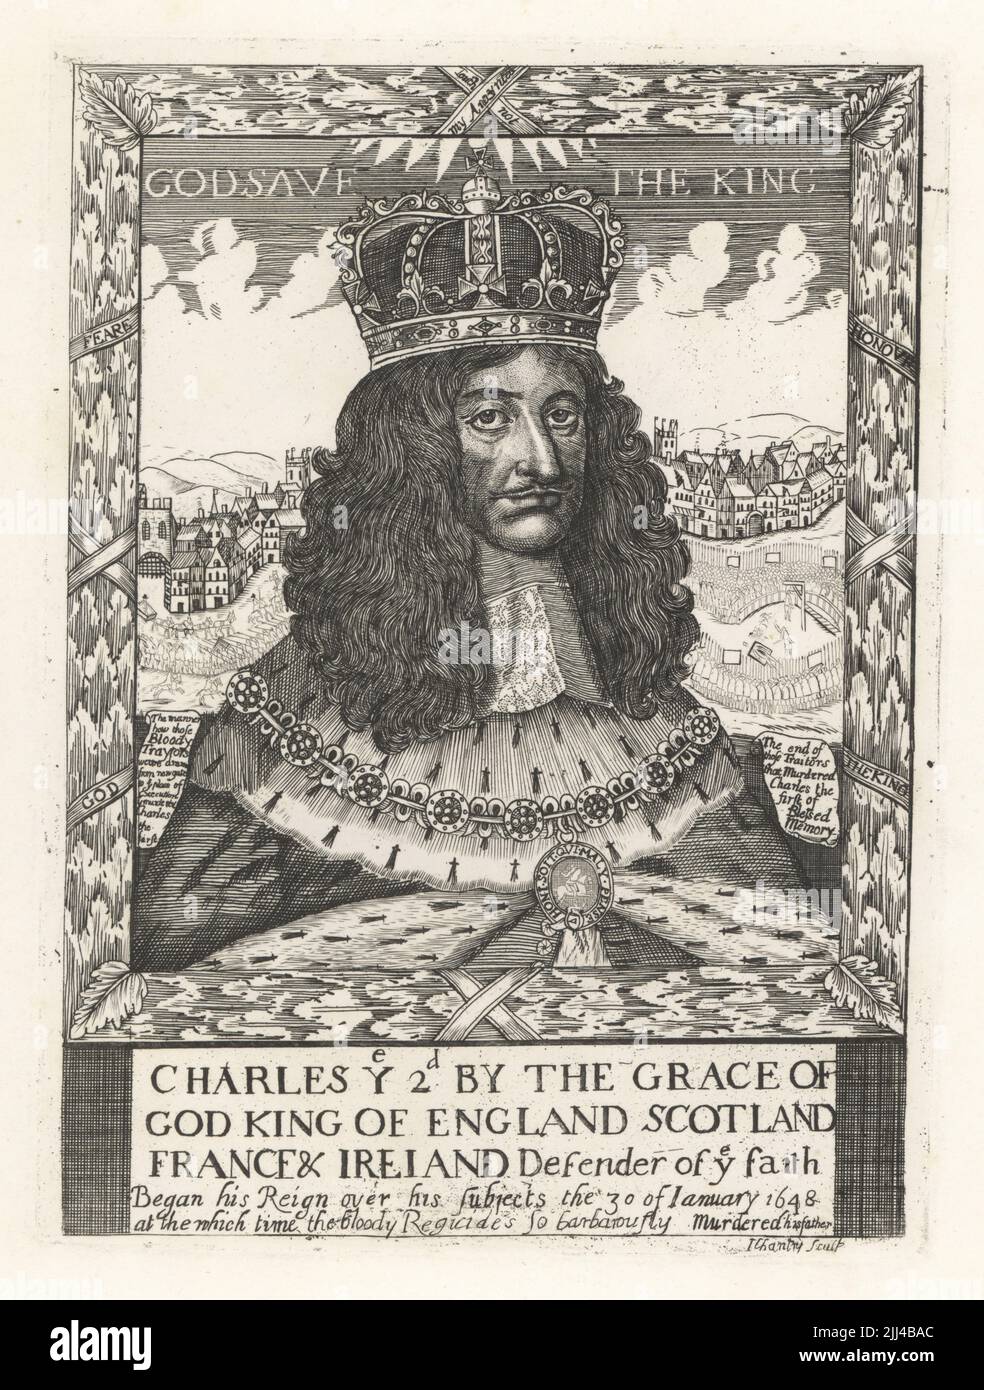 King Charles II of England, 1630-1685, with crown on his head, ermine mantle and collar of the Order of the Garter. View of the parade of the regicides of Charles I from Newgate to execution on Tower Hill in the background. Inscribed By the grace of God King of England, Scotland, France & Ireland. From a scarce and curious print by John Chantry. Copperplate engraving from Samuel Woodburn’s Gallery of Rare Portraits Consisting of Original Plates, George Jones, 102 St Martin’s Lane, London, 1816. Stock Photo